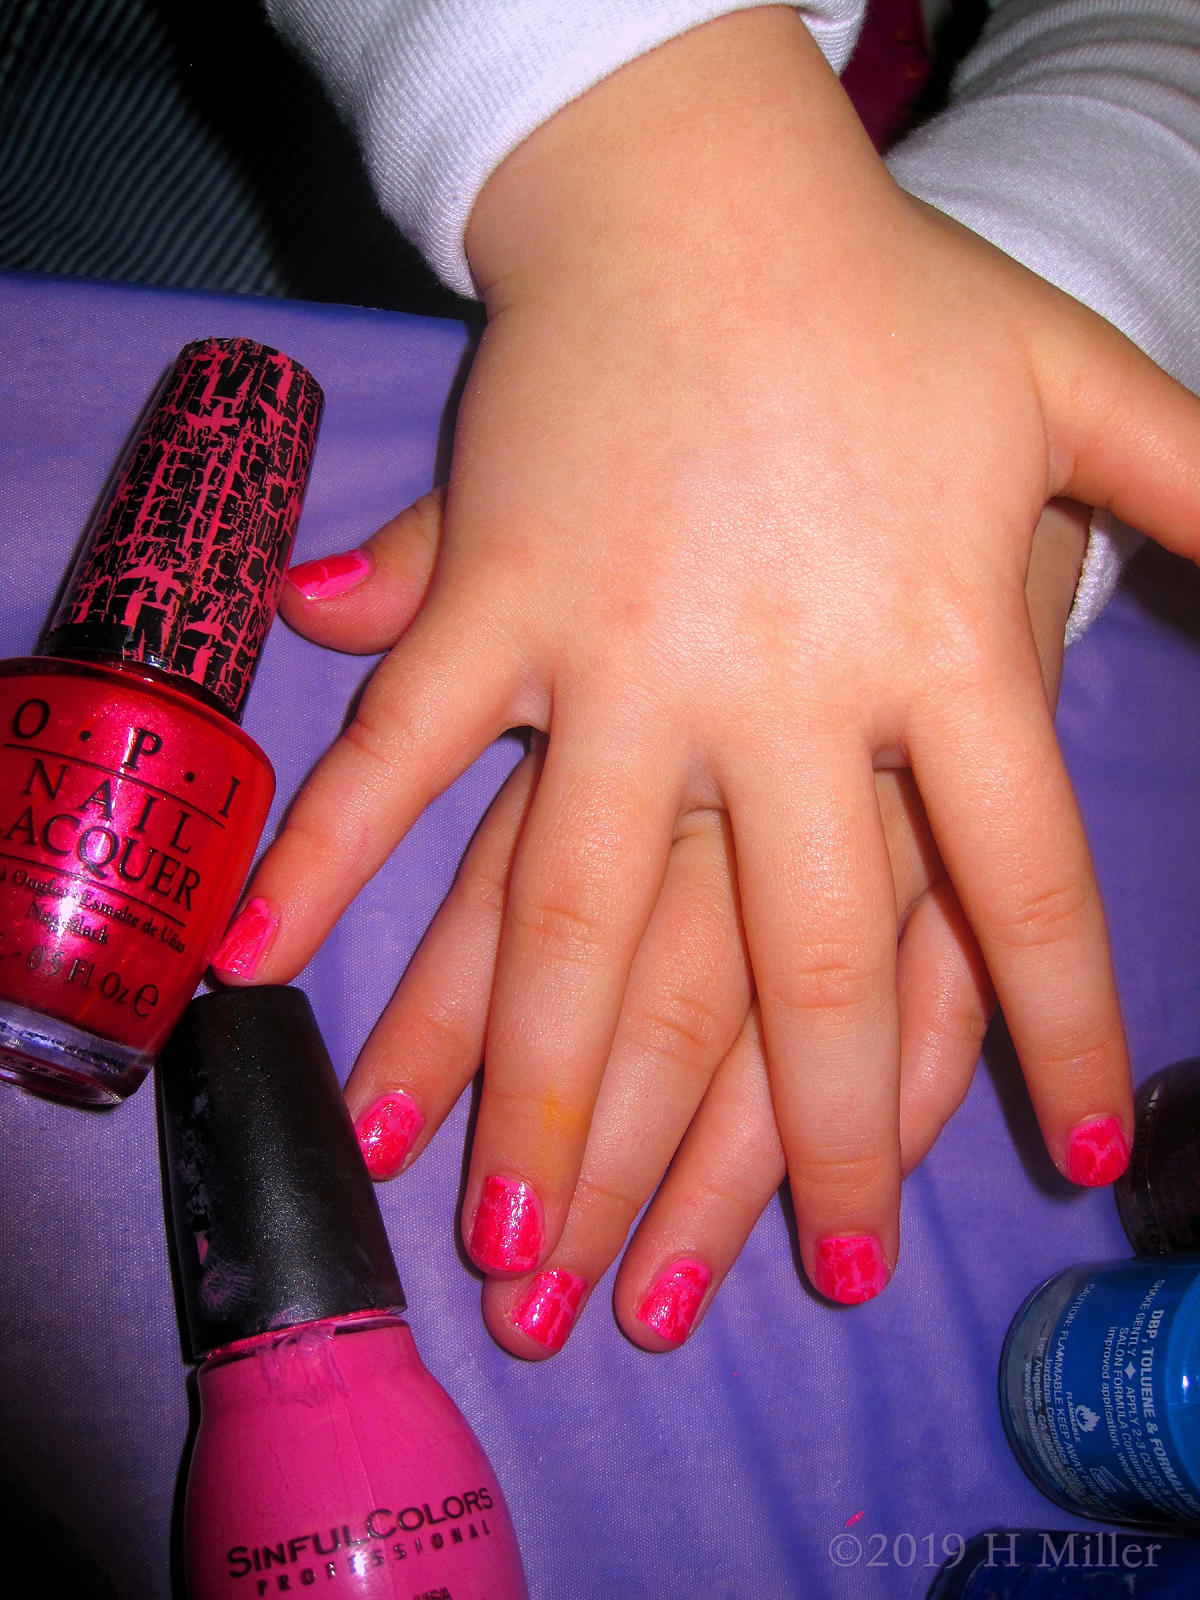 Fun Pink Base Coat With Hot Pink Shatter OPI Overlay On This Girls Manicure!